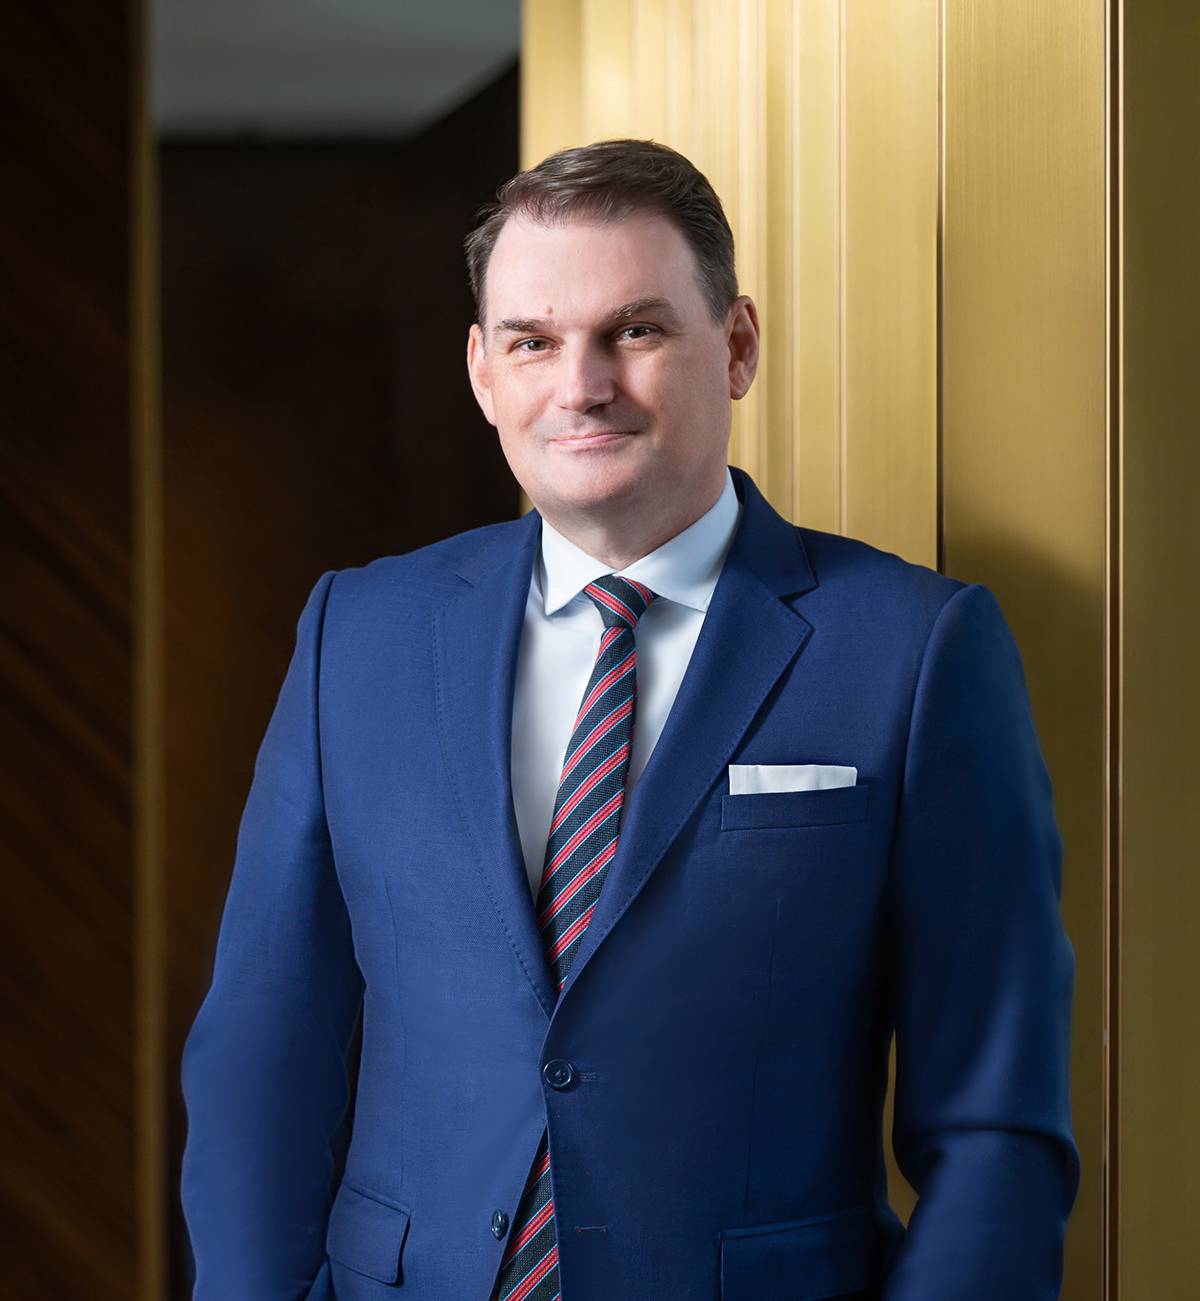 Wharf Hotels Appoints Michael Poutawa Group Director Restaurants, Bars & Events